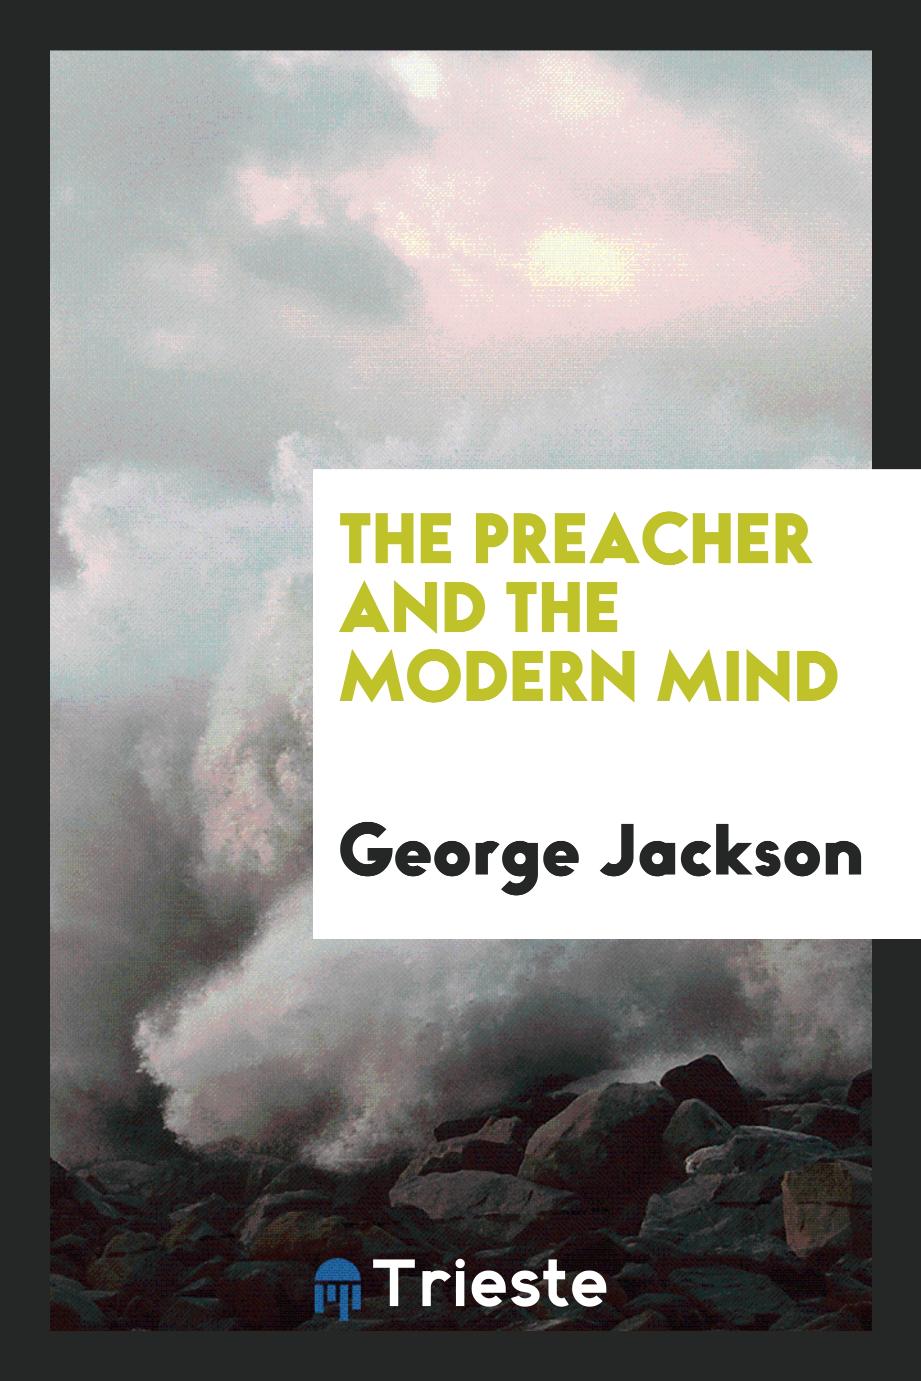 The preacher and the modern mind